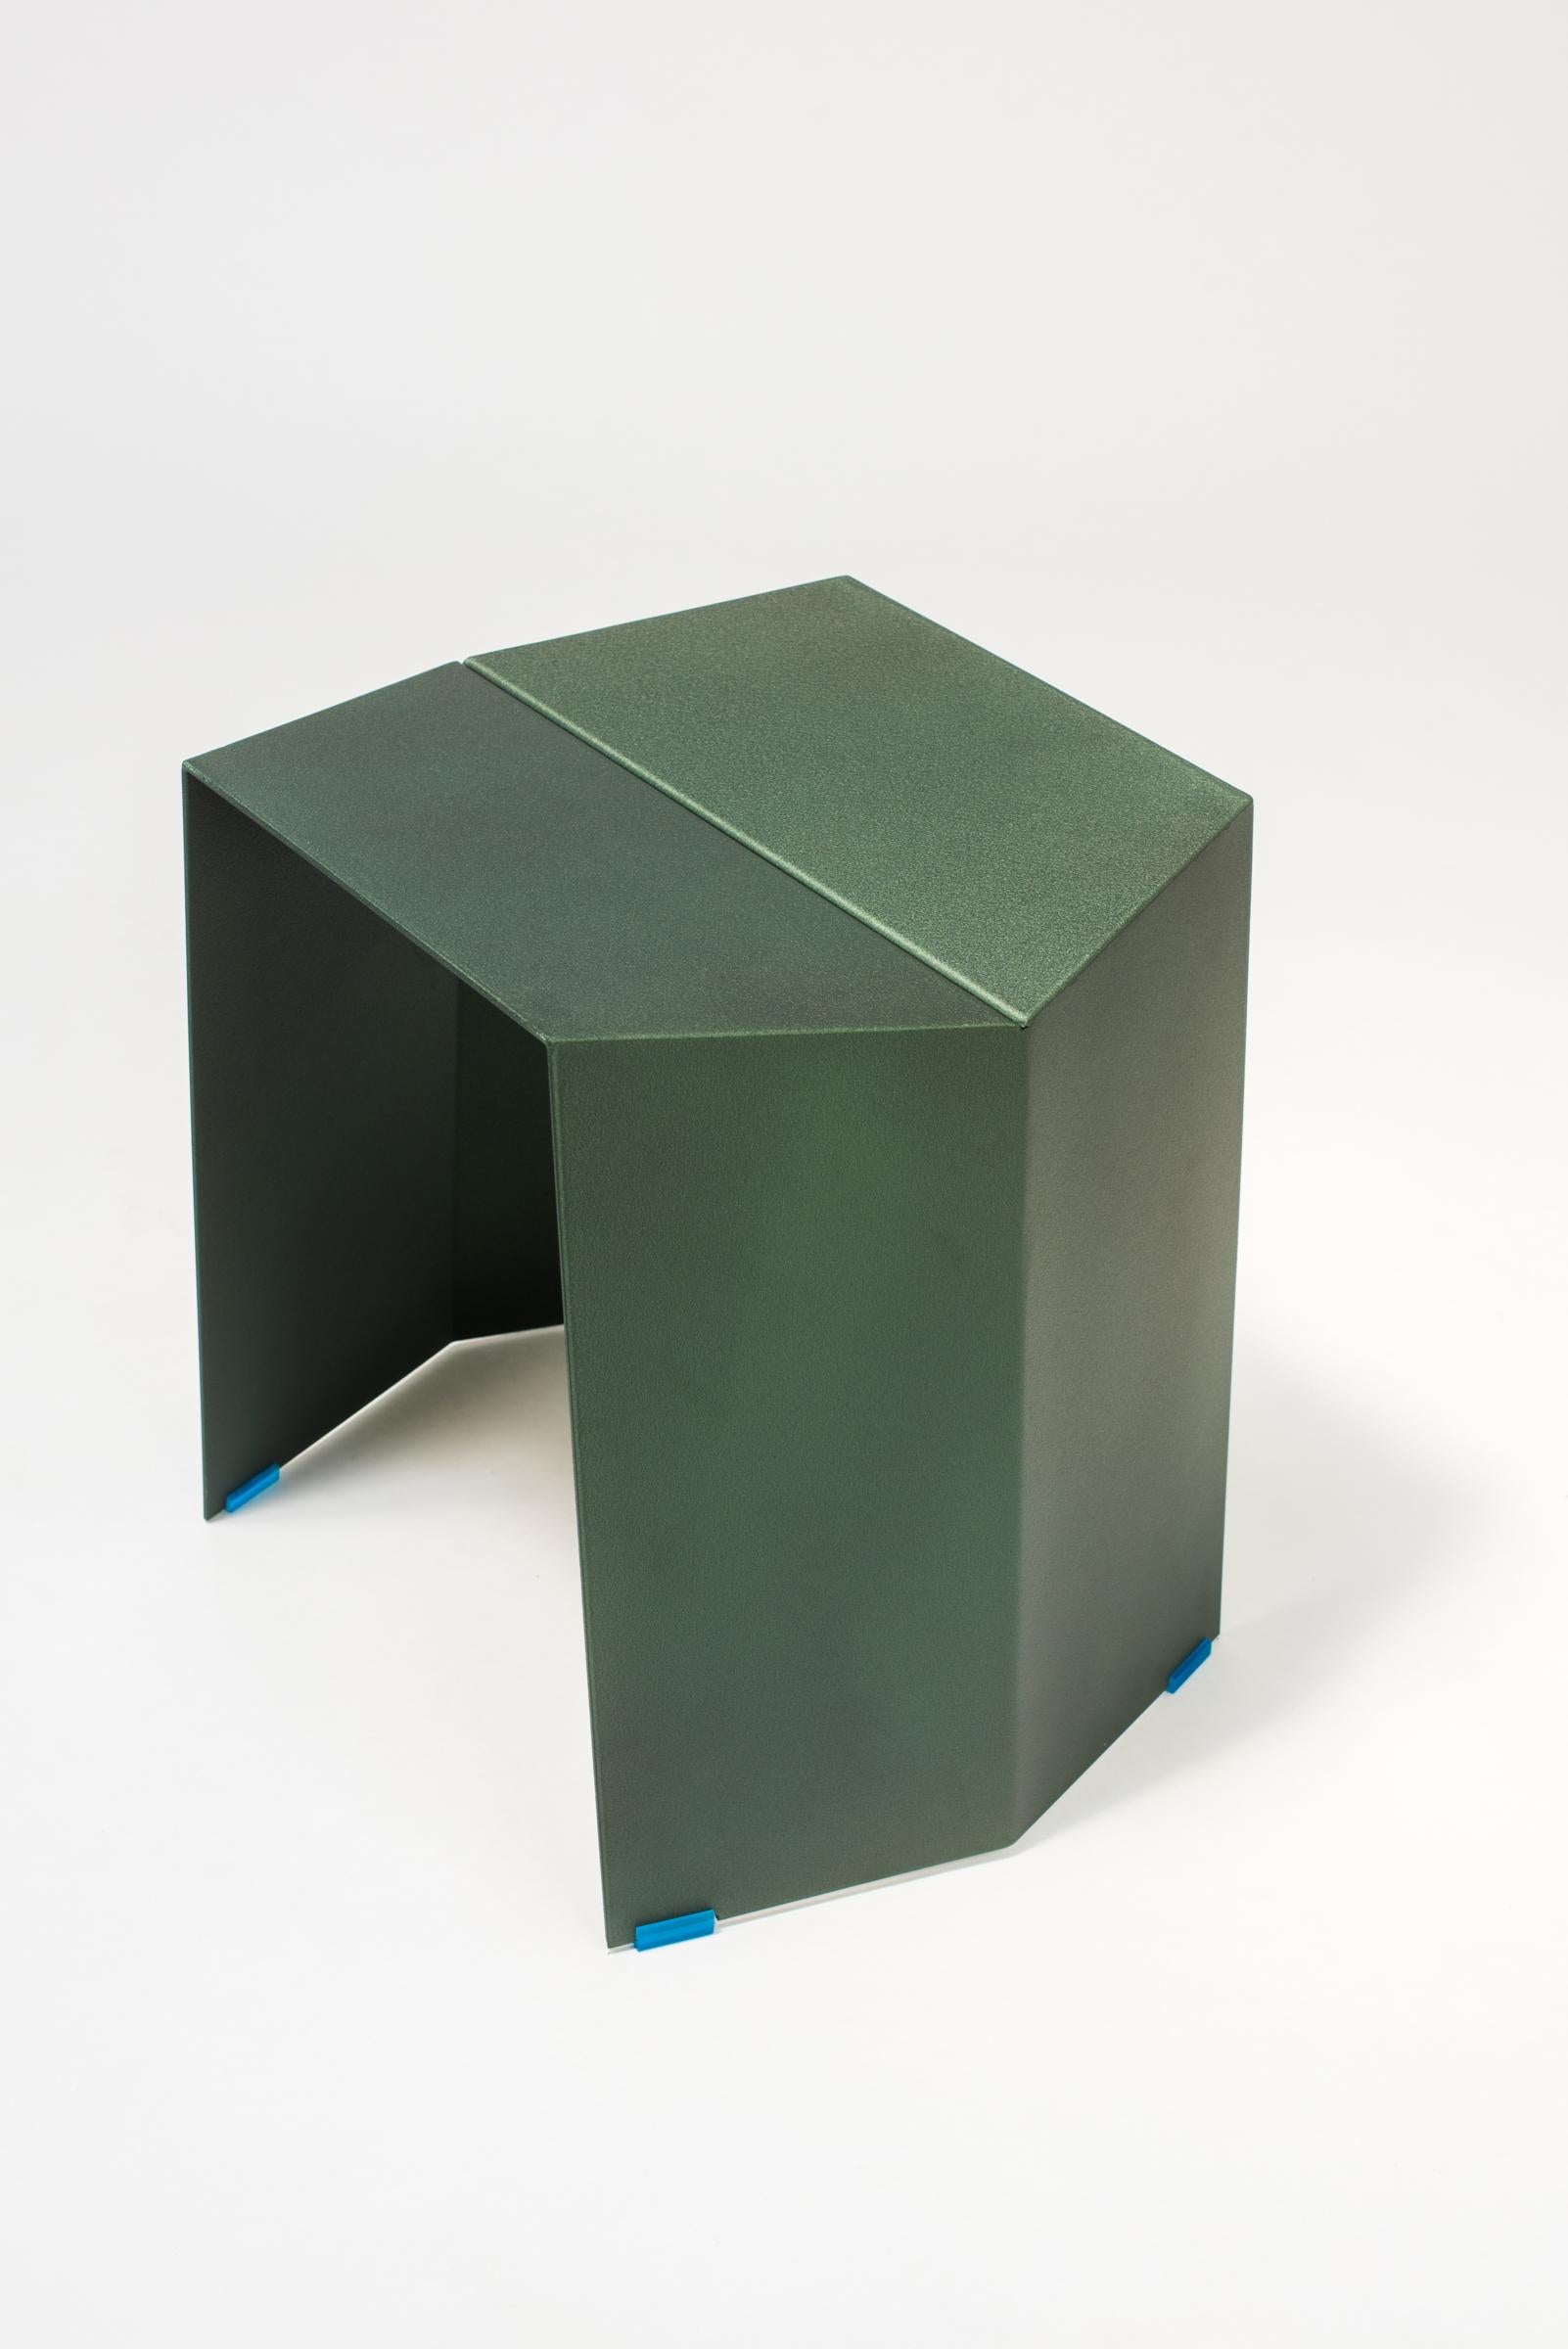 The Helium stool is a lightweight aluminum stool finished in a durable powdercoat that is suitable for interior and exterior use. Multiples can be stacked as shown in photos. Standard colors are bronze, emerald moss, midnight blue, and forest green.